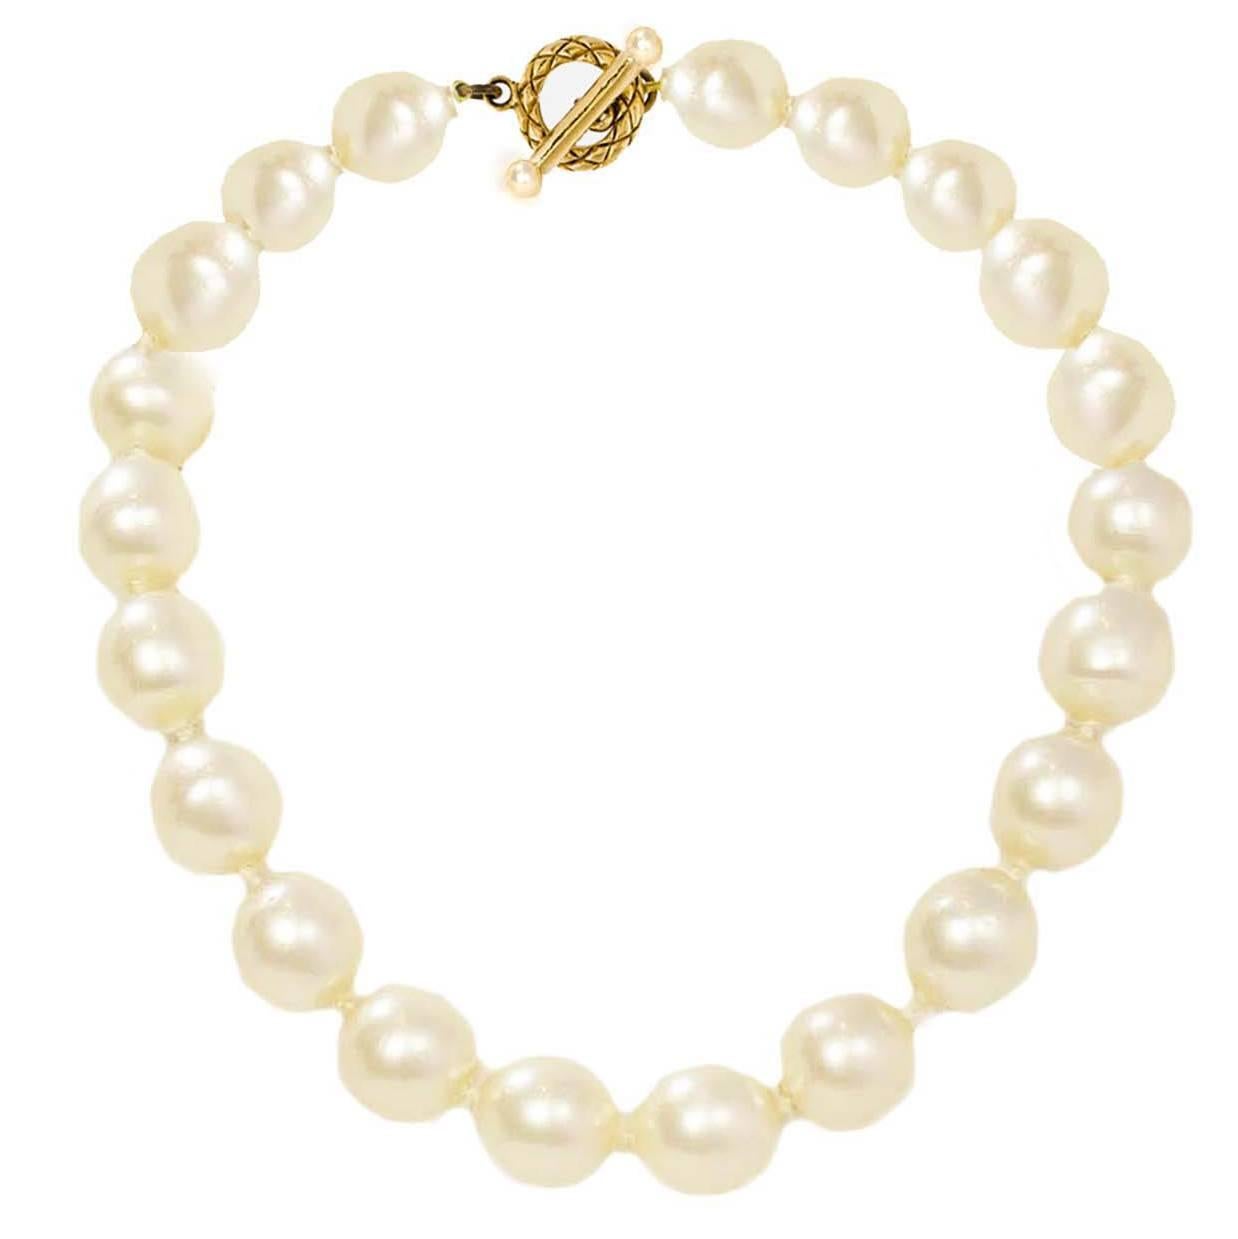 Vintage CHANEL Classic Multi Strand Pearl Choker Necklace